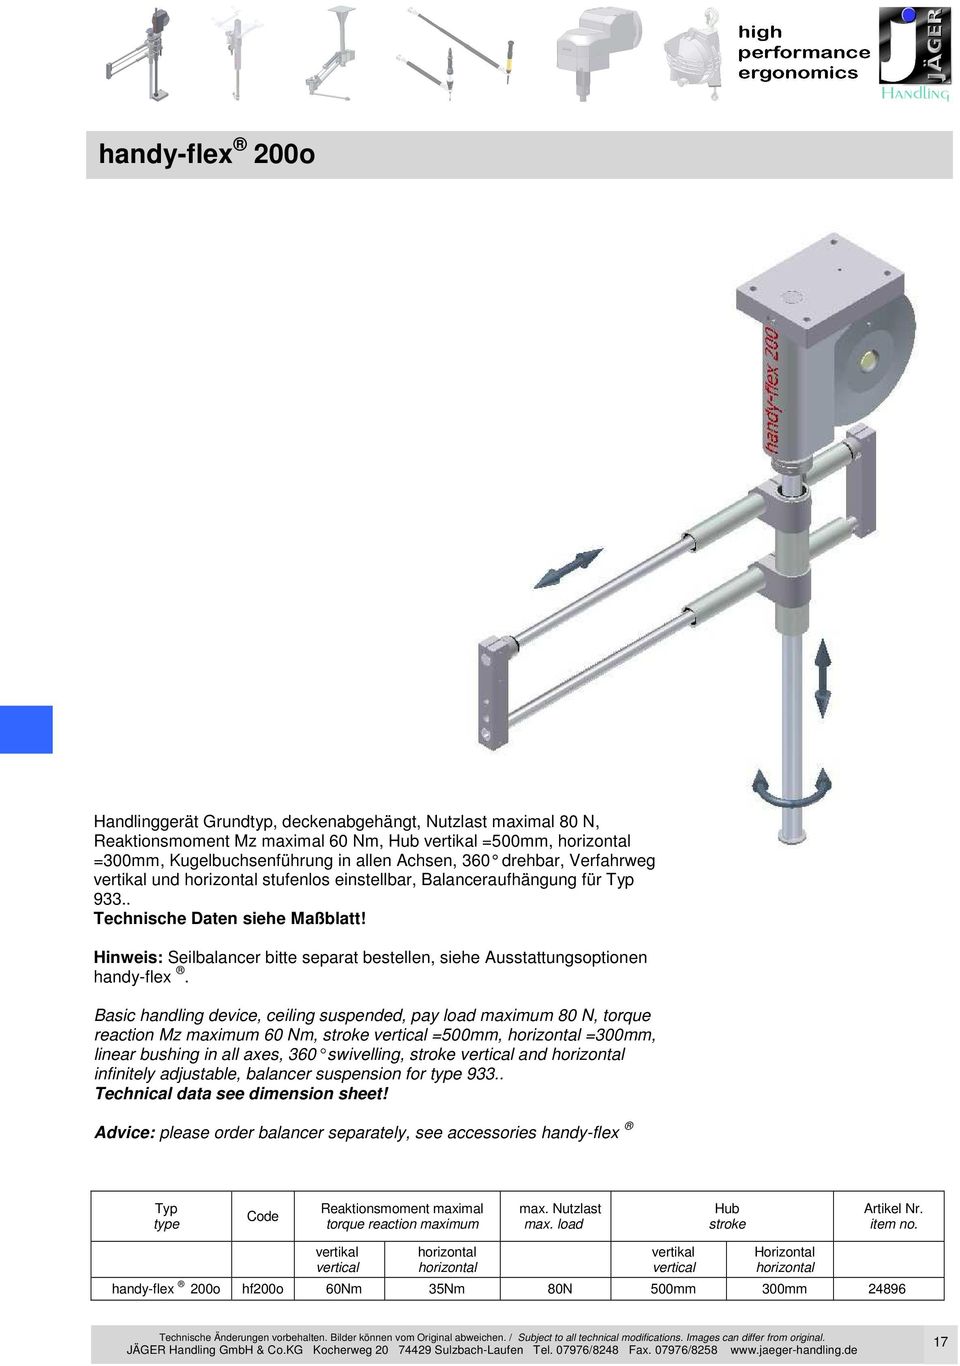 Basic handling device, ceiling suspended, pay load maximum 80 N, torque reaction Mz maximum 60 Nm, stroke vertical =500mm, =300mm, linear bushing in all axes, 360 swivelling, stroke vertical and